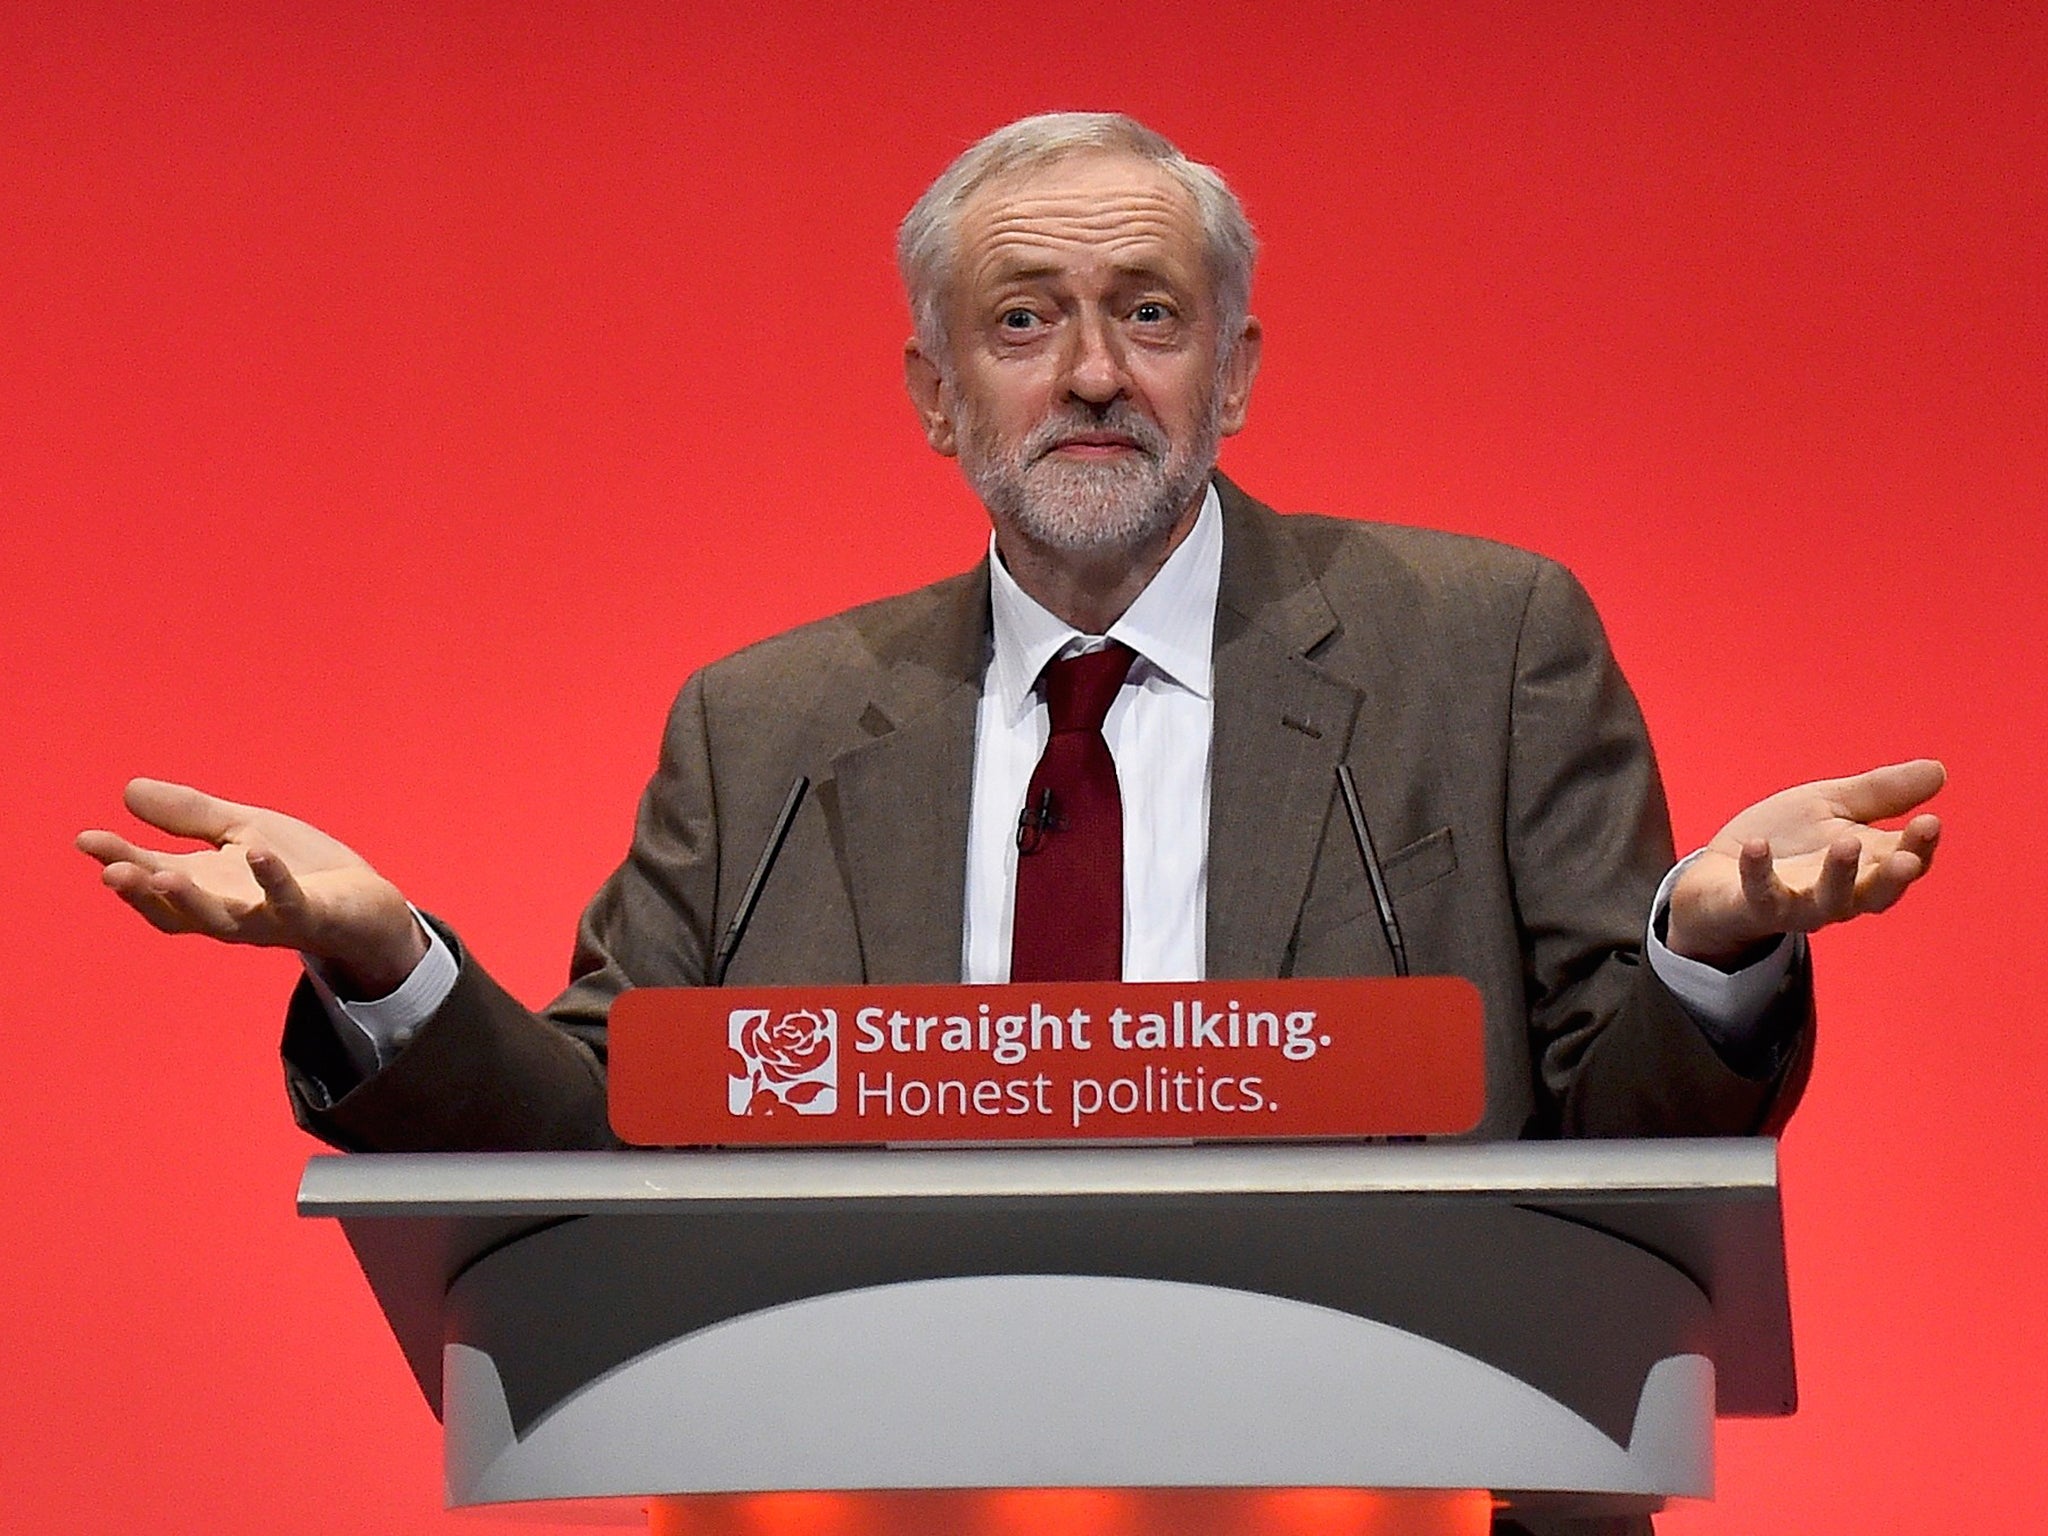 Jeremy Corbyn poked fun at many of the negative stories dogging him over the past fortnight